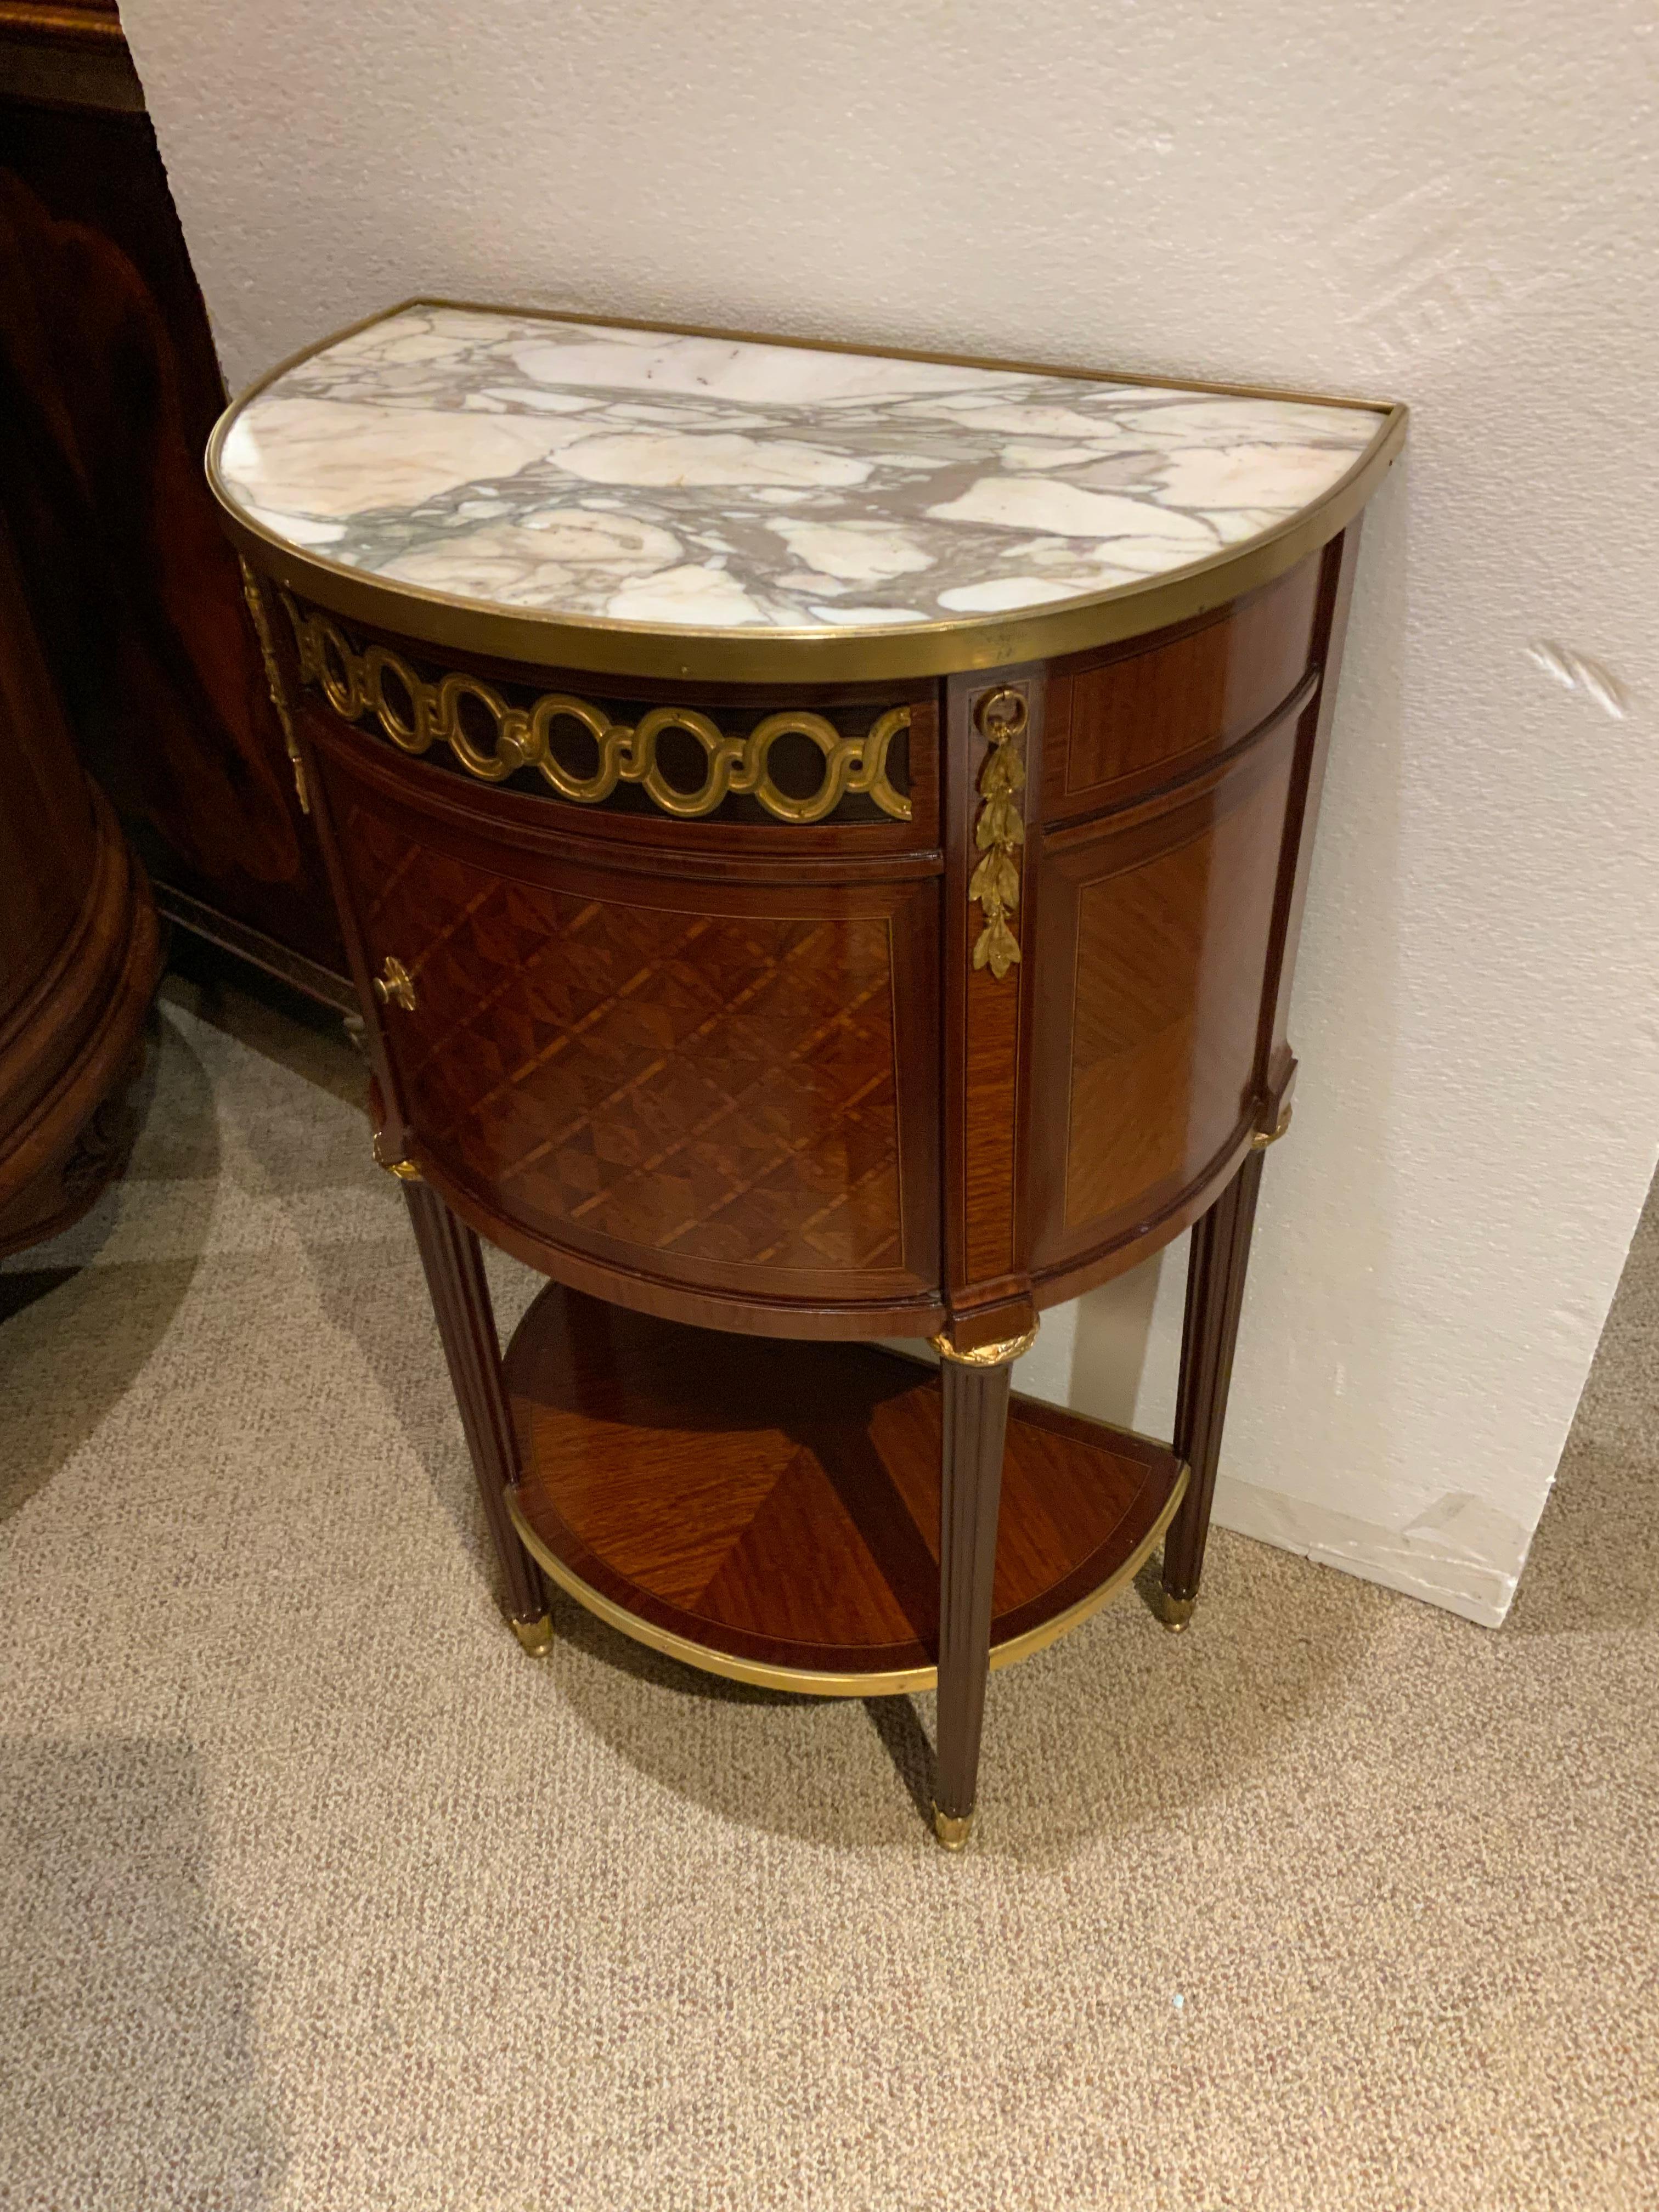 This is a signed French cabinet by the maker “Krieger” which makes
This piece special. It is signed at the top of the drawer. The marble top
Is in shades of cream and beige with taupe hues. The marble is bound
In a brass. The case is in a